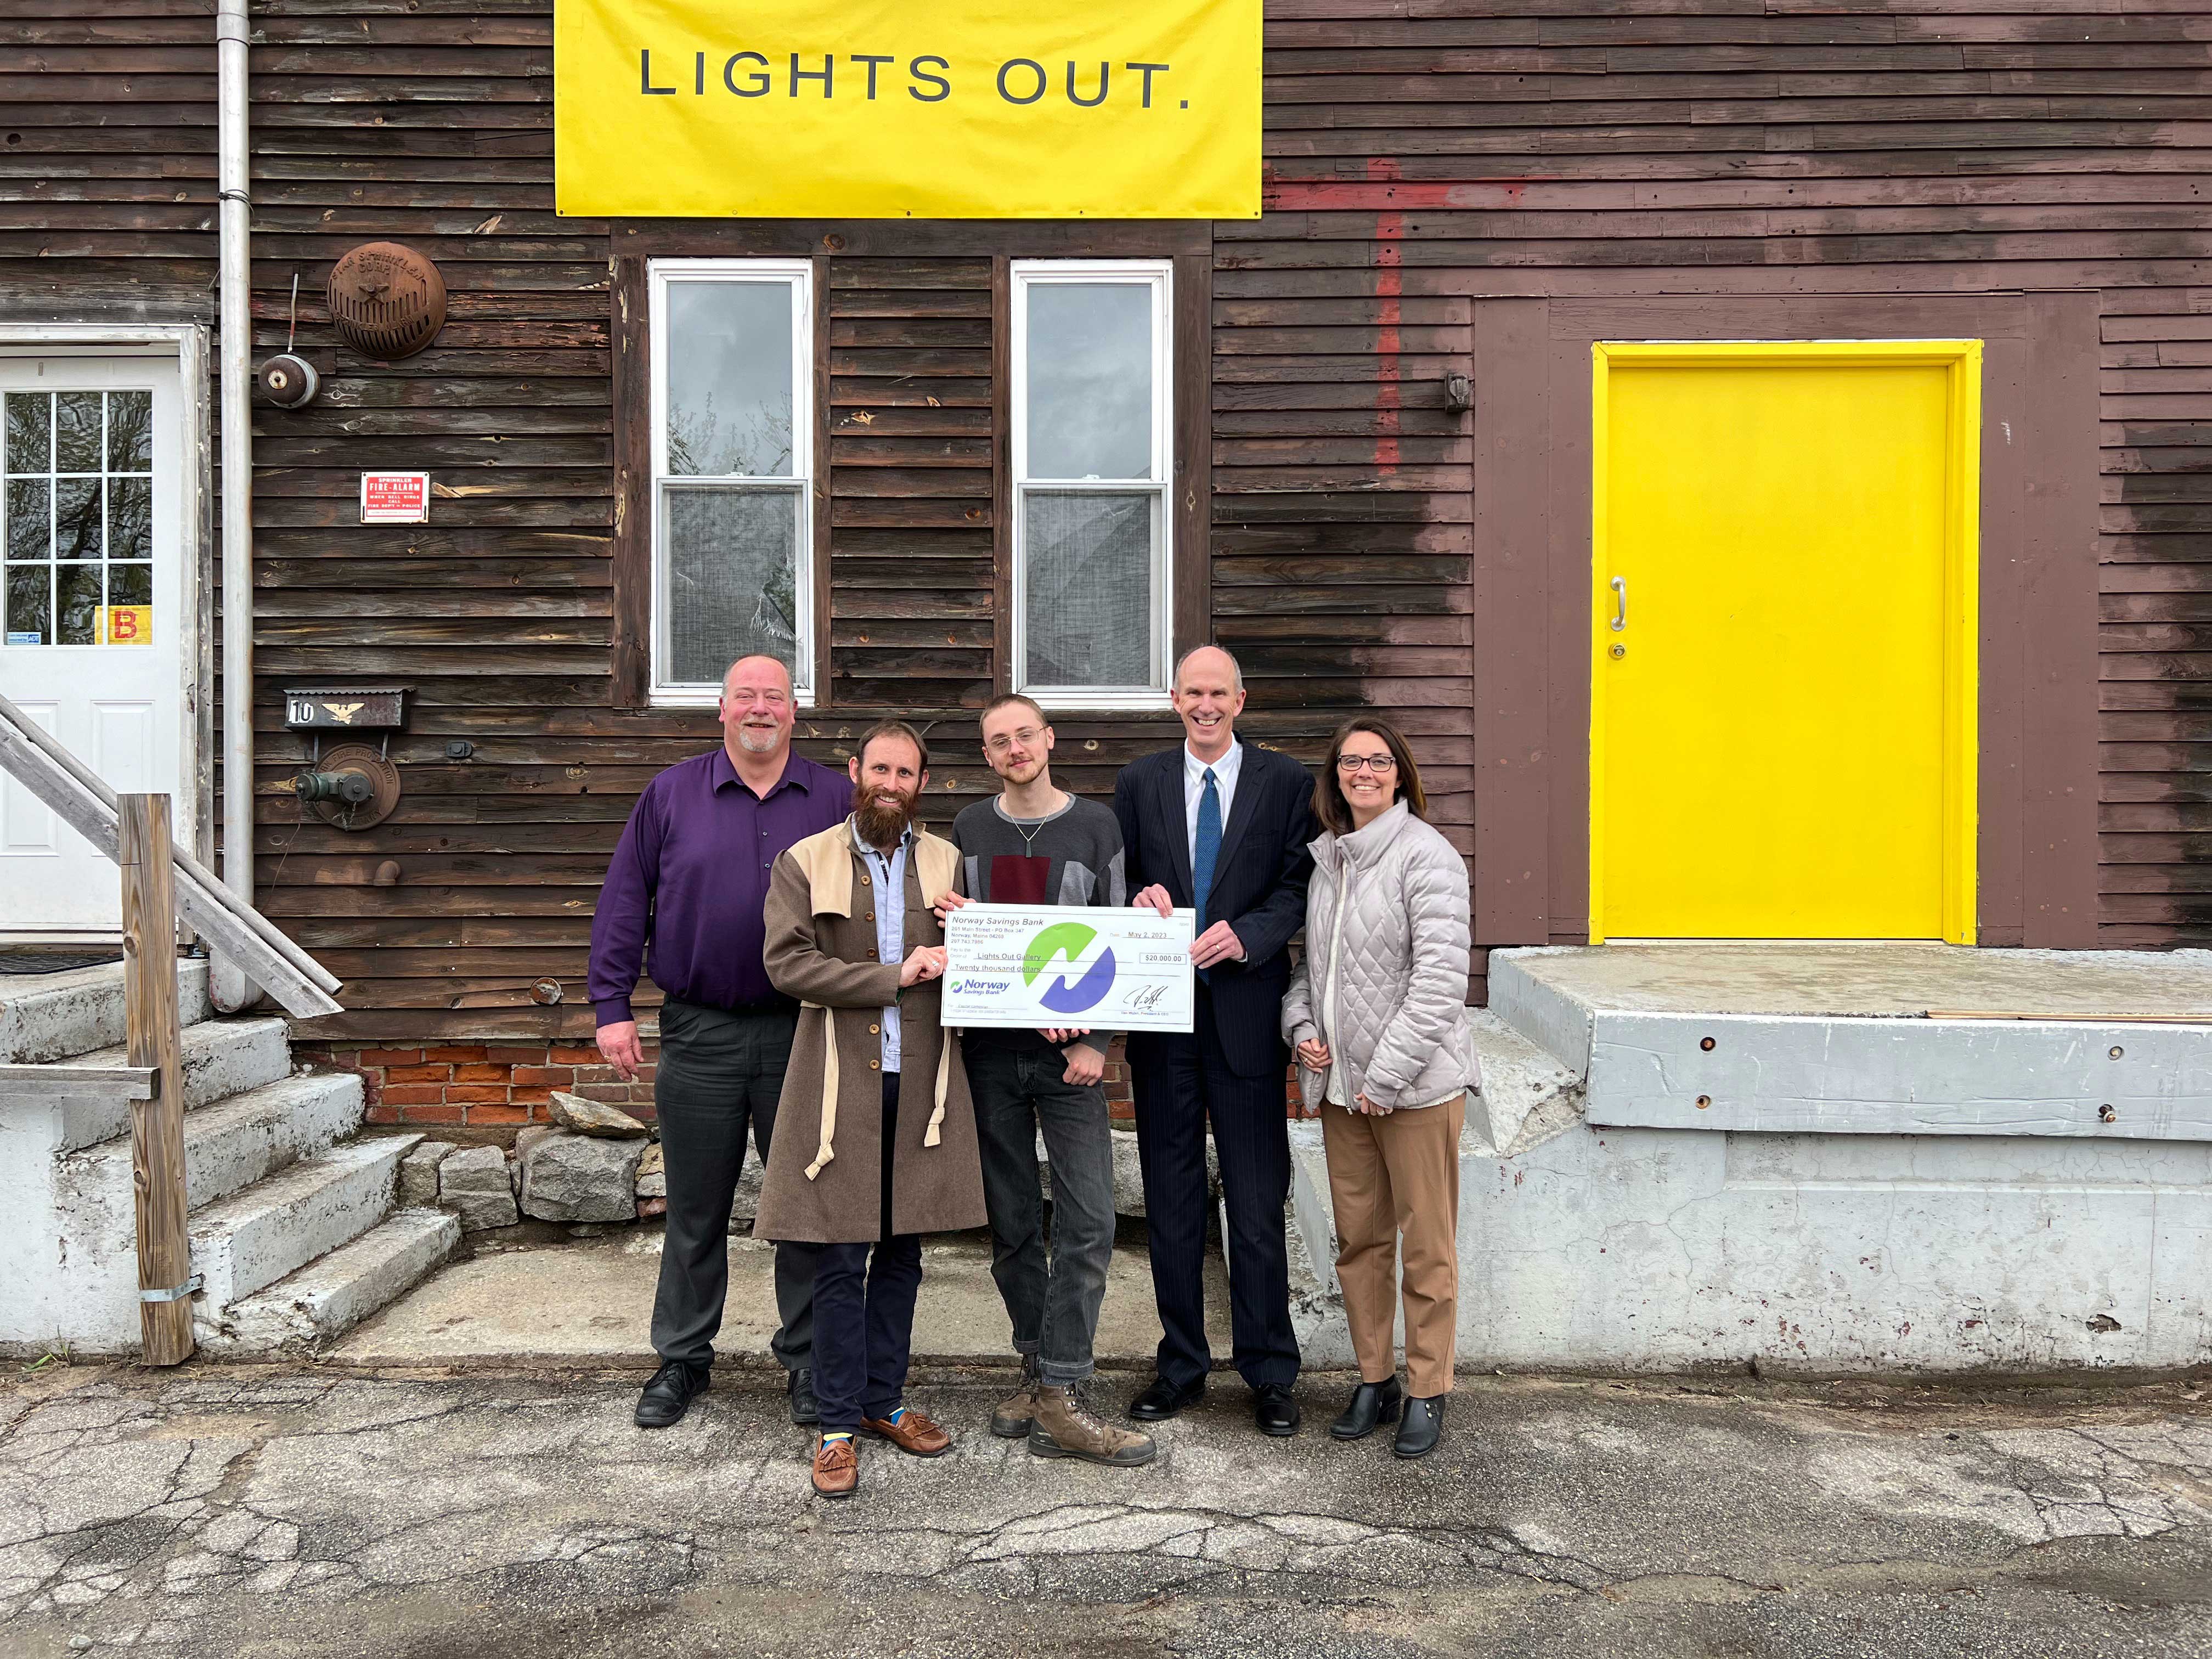 Norway Savings Bank employees presenting a large check to Lights Out Gallery